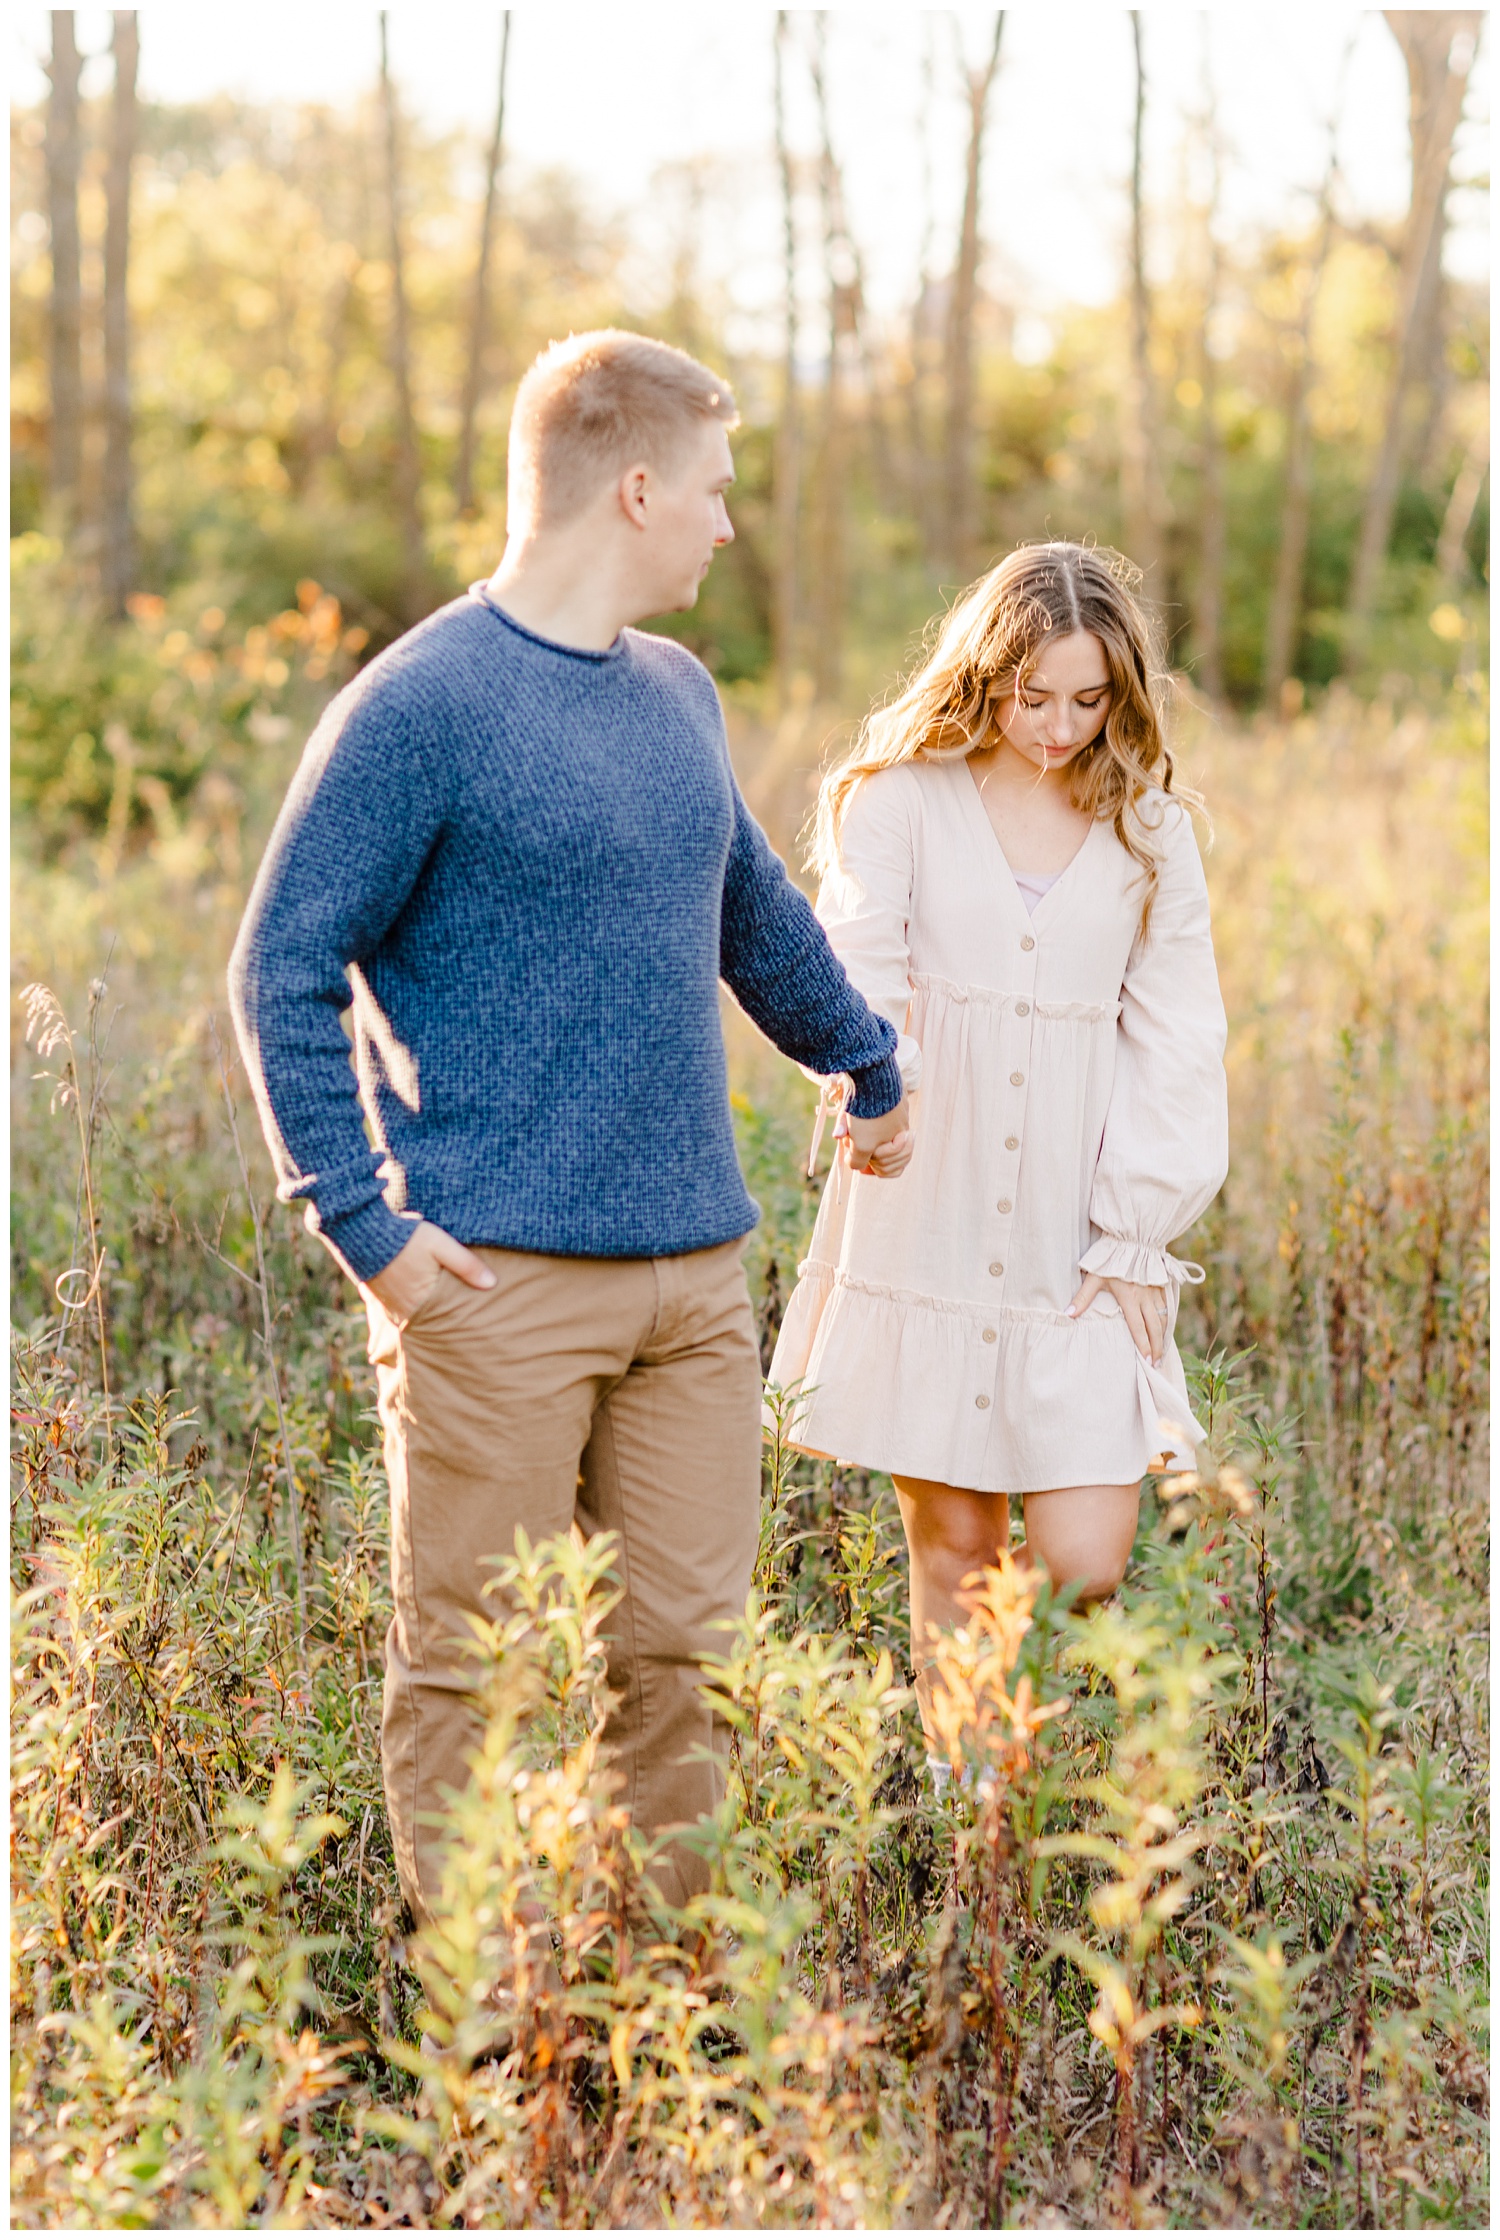 Ashlyn and Thad walk across a grassy pasture holding hands | CB Studio